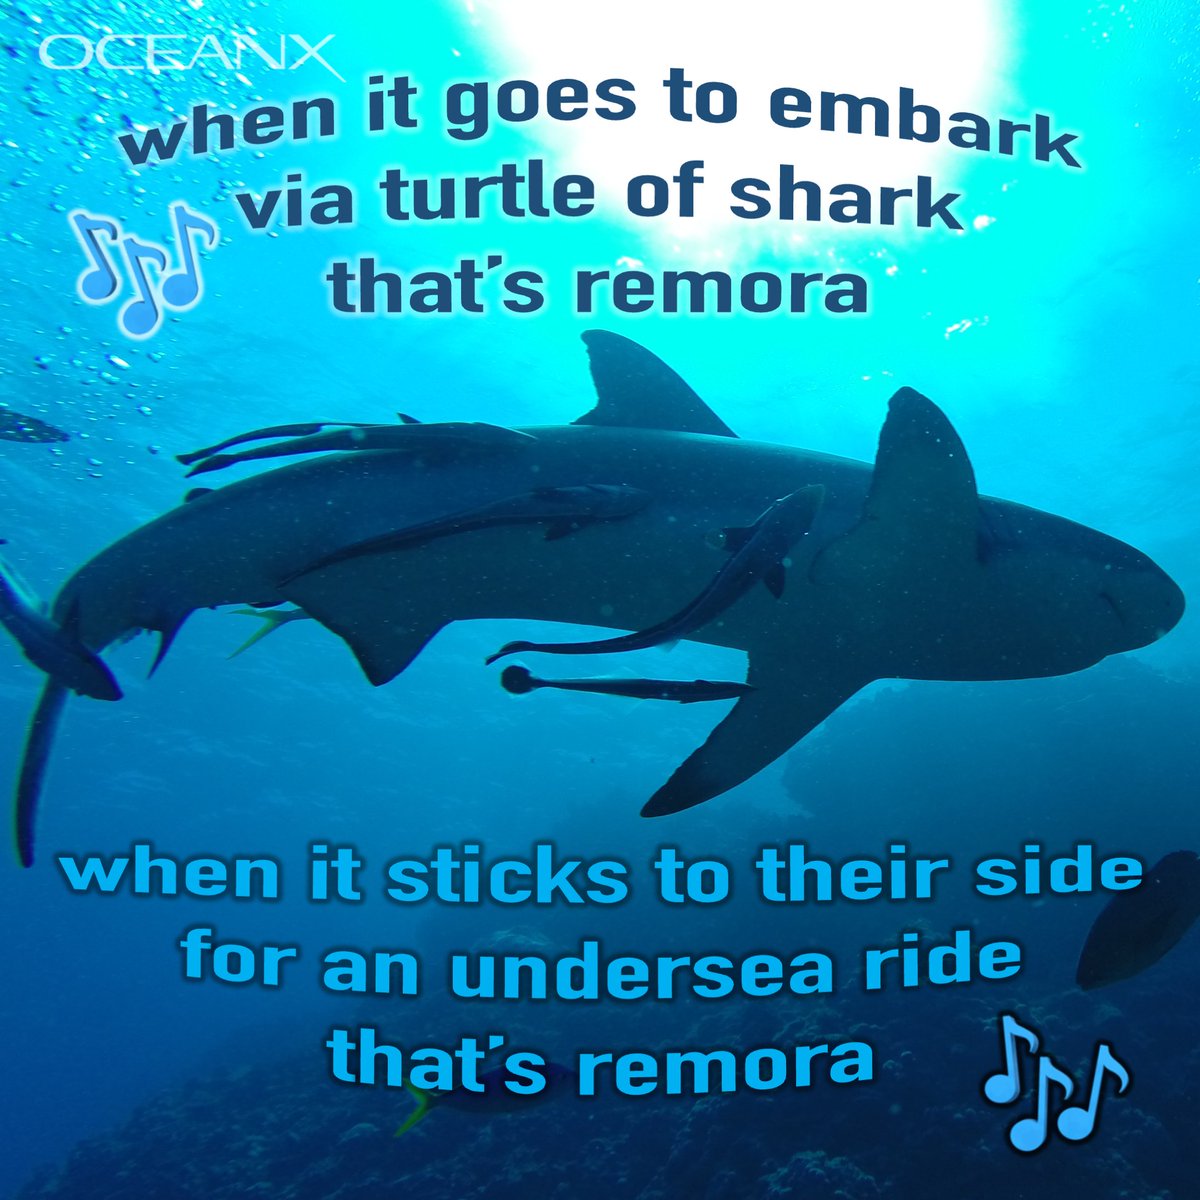 Bless that Dean Martin song and the many puns it has given the ocean community🦈 

#mememonday #remora #shark #thatsamore